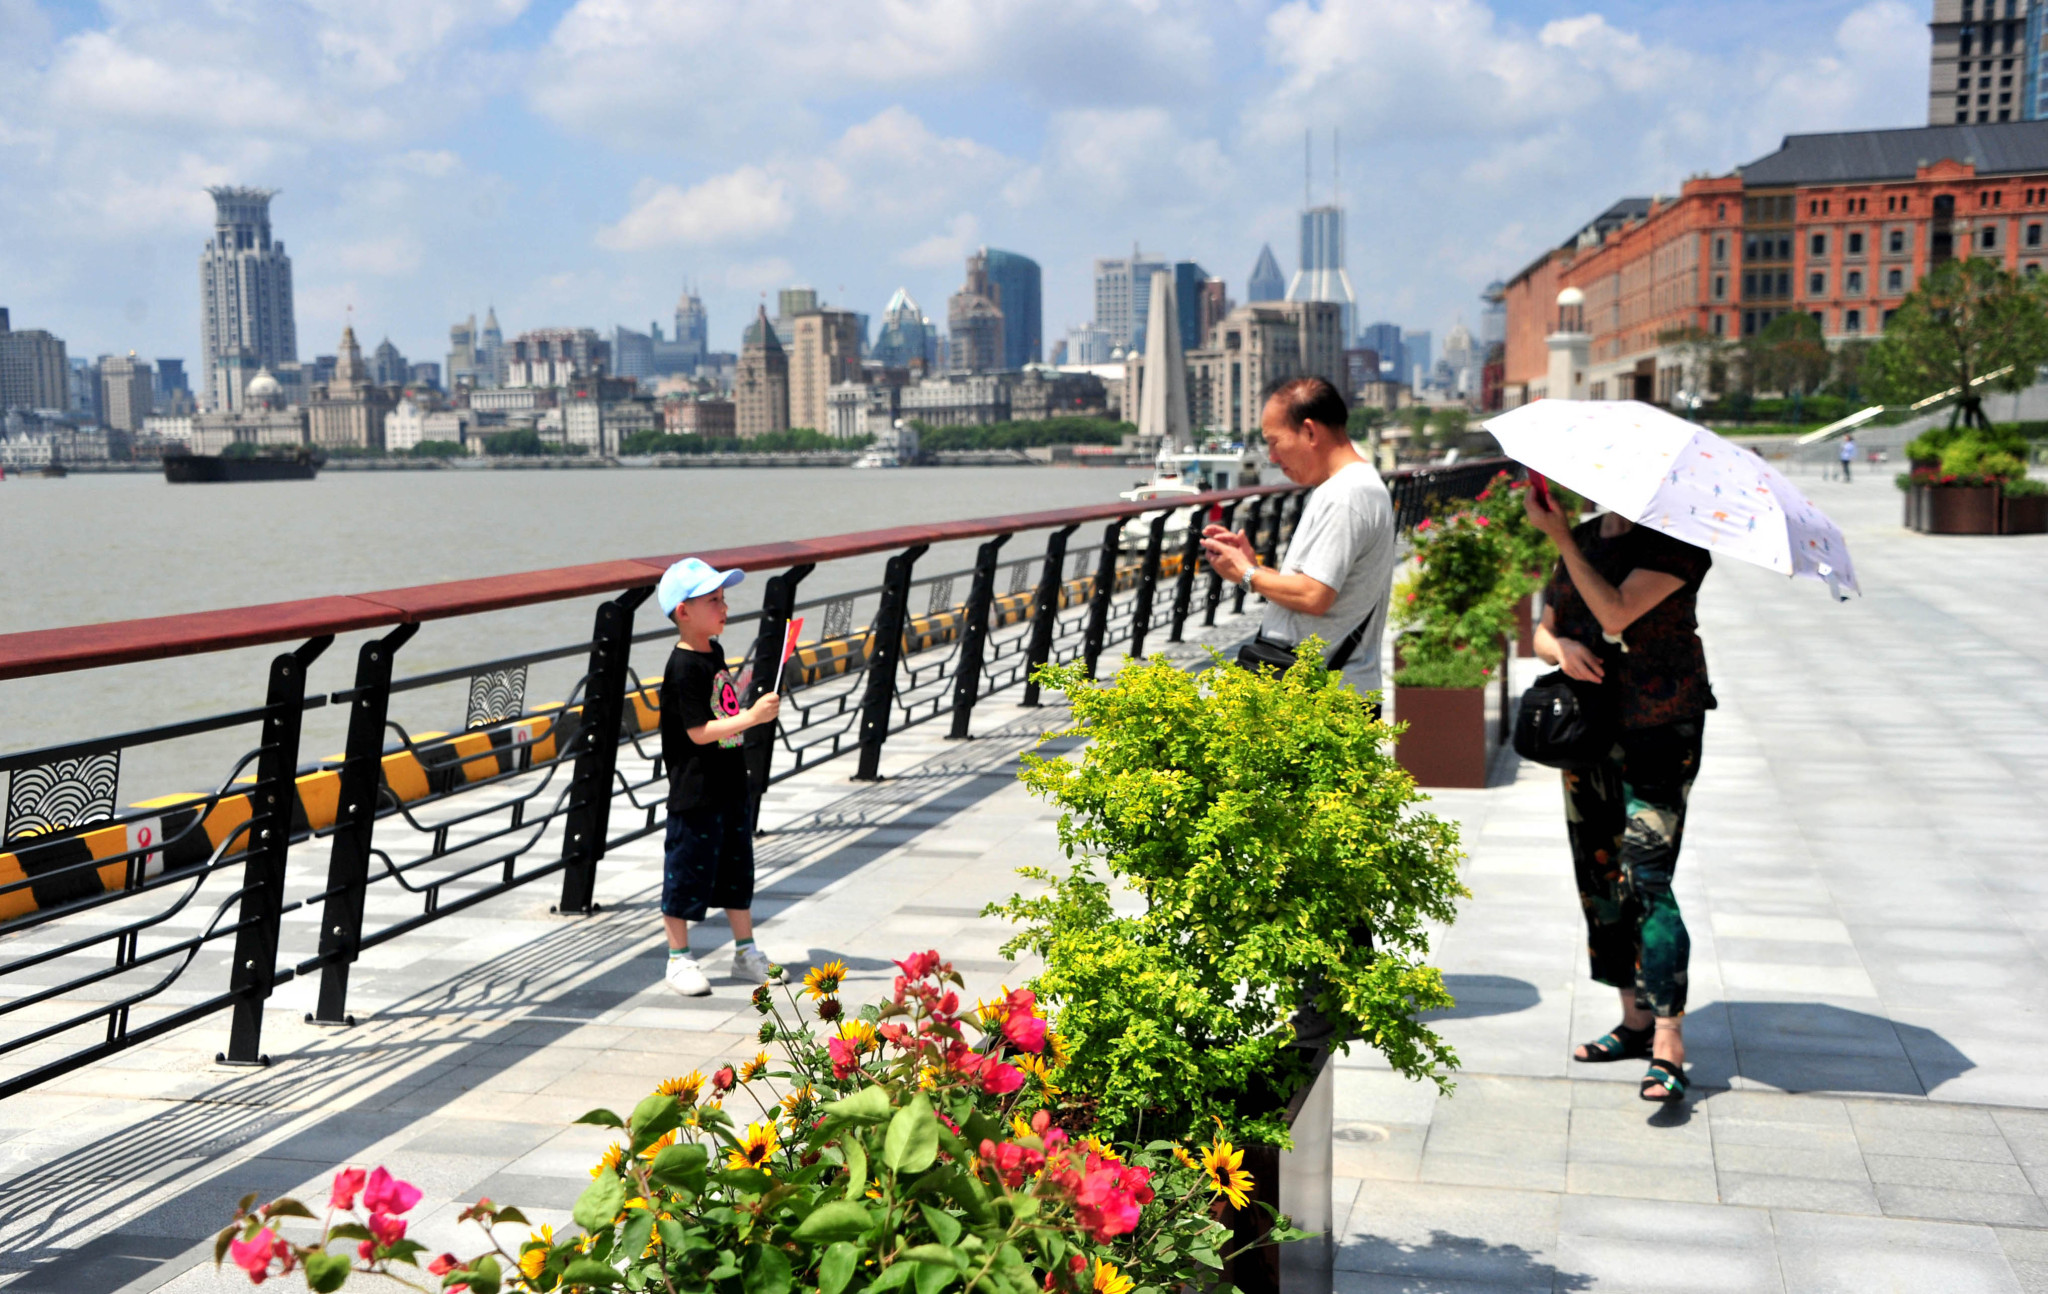 A file photo shows tourists ambling along the renovated North Bund Bay area in Shanghai. /CFP